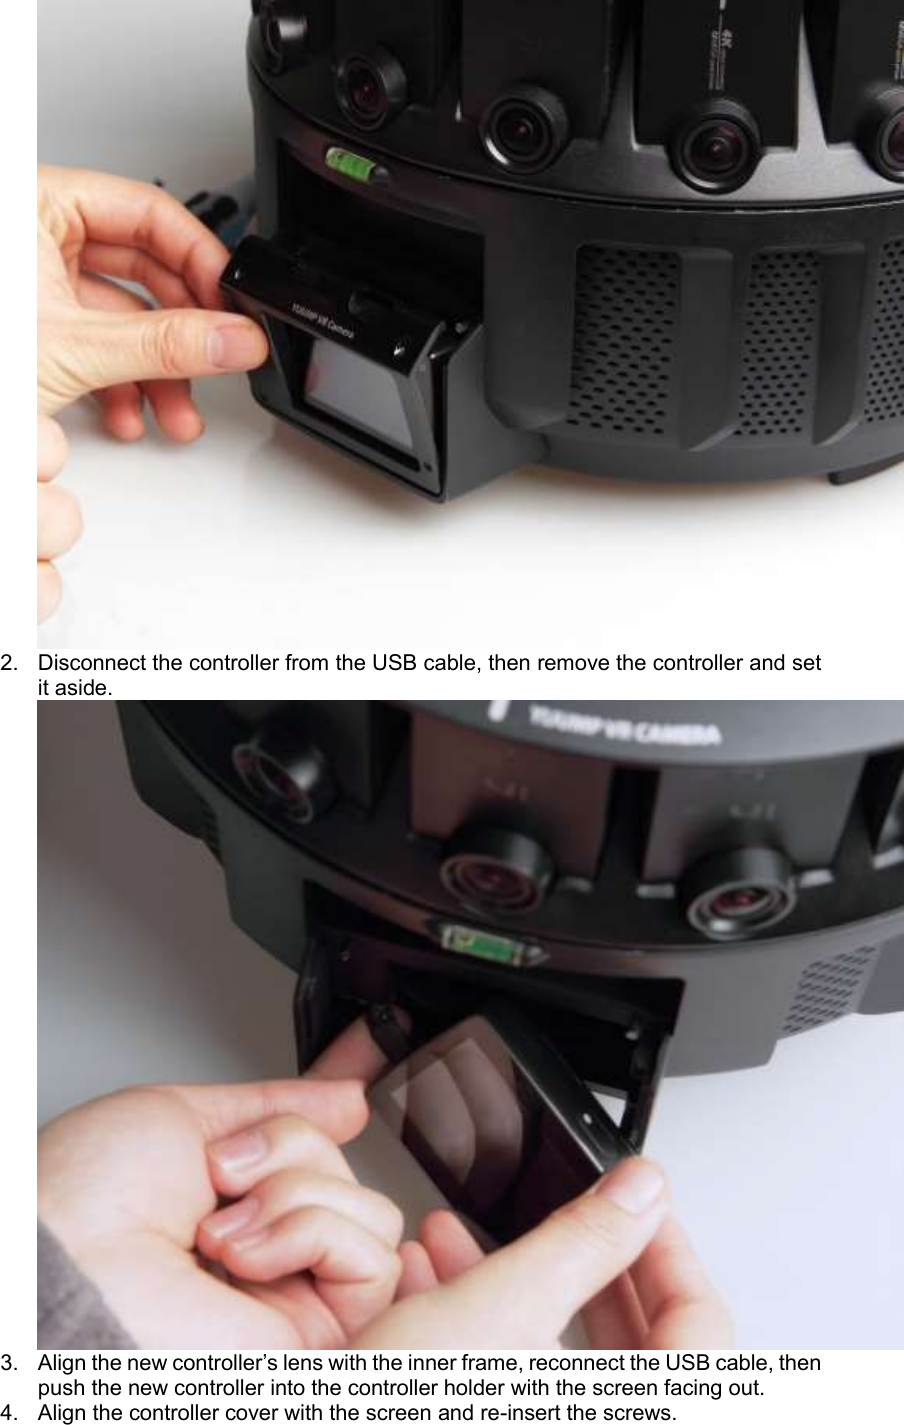  2.  Disconnect the controller from the USB cable, then remove the controller and set it aside.  3. Align the new controller’s lens with the inner frame, reconnect the USB cable, then push the new controller into the controller holder with the screen facing out. 4.  Align the controller cover with the screen and re-insert the screws.  